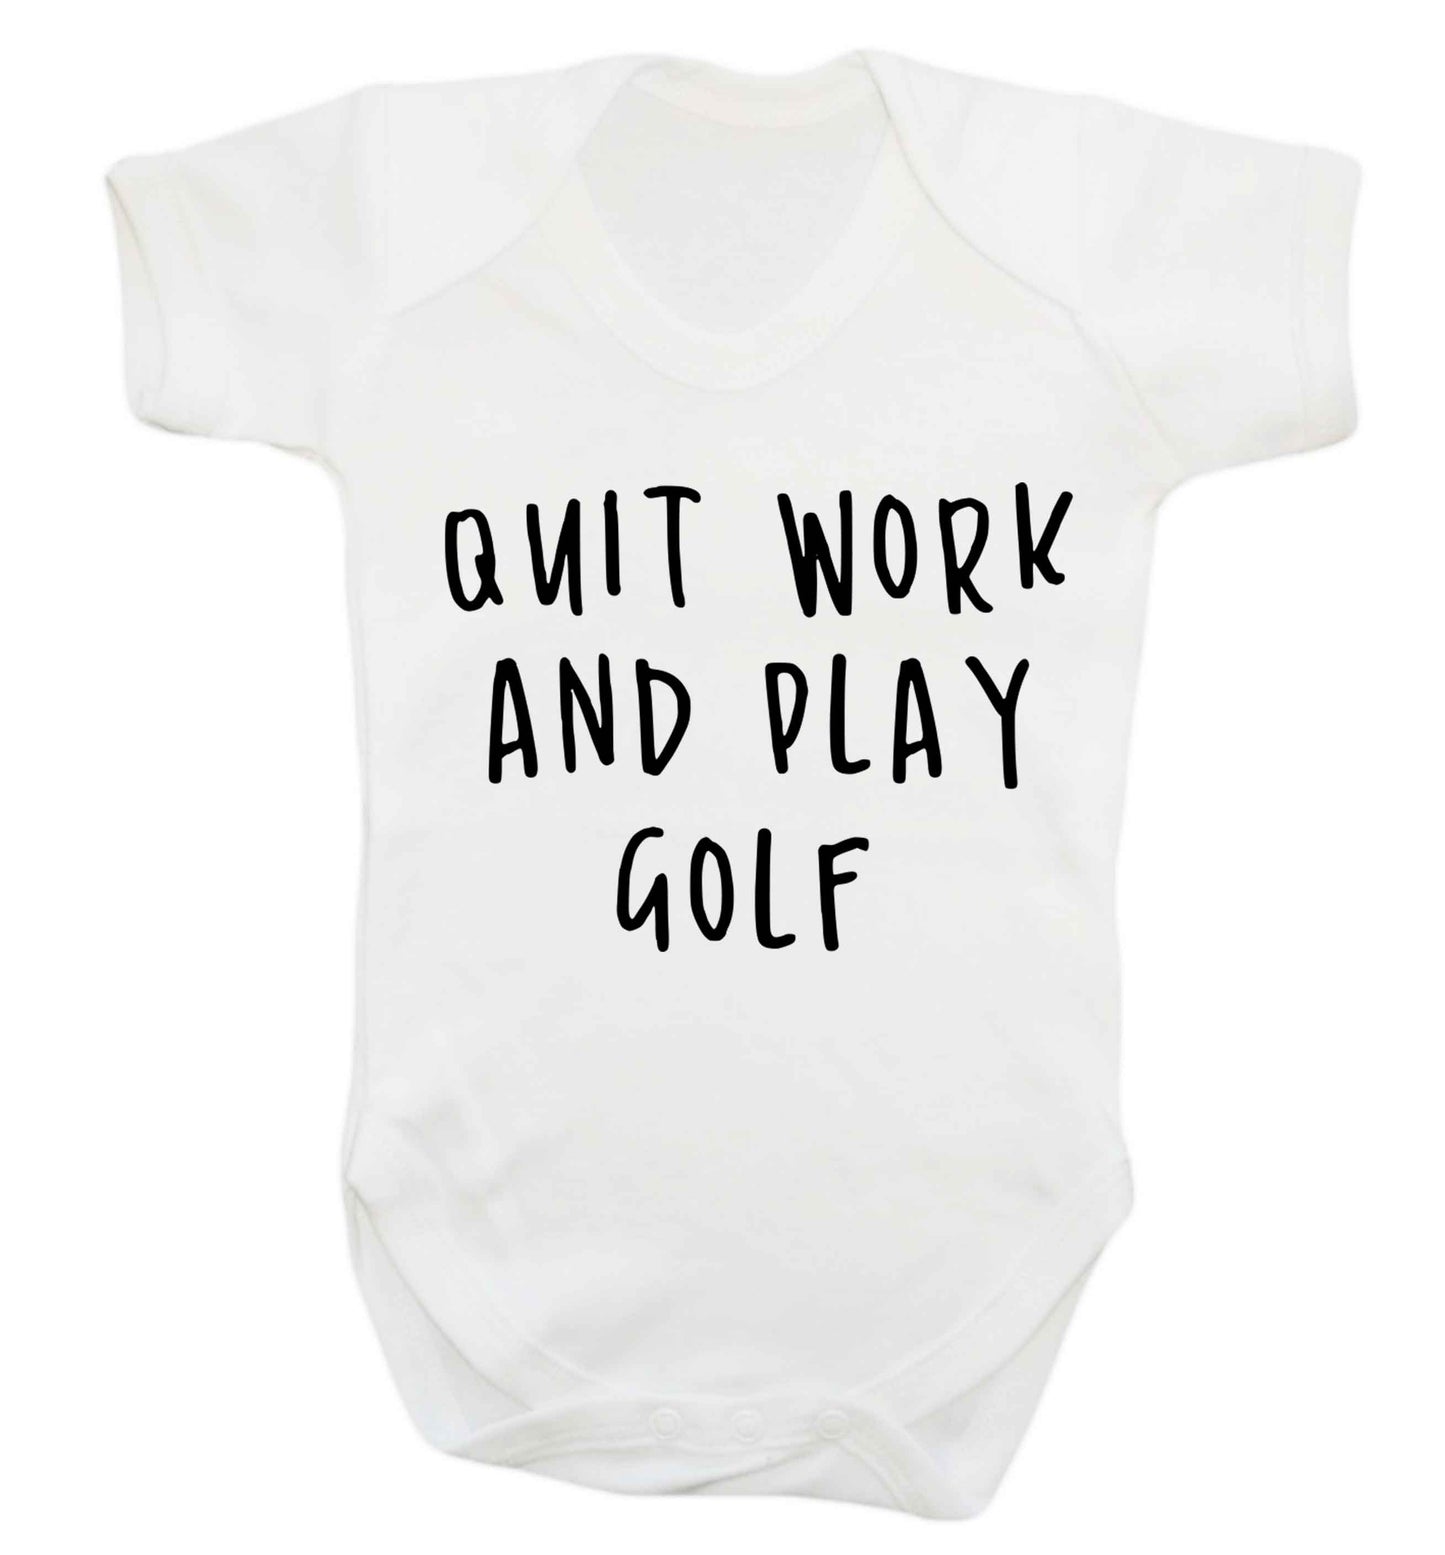 Quit work and play golf Baby Vest white 18-24 months